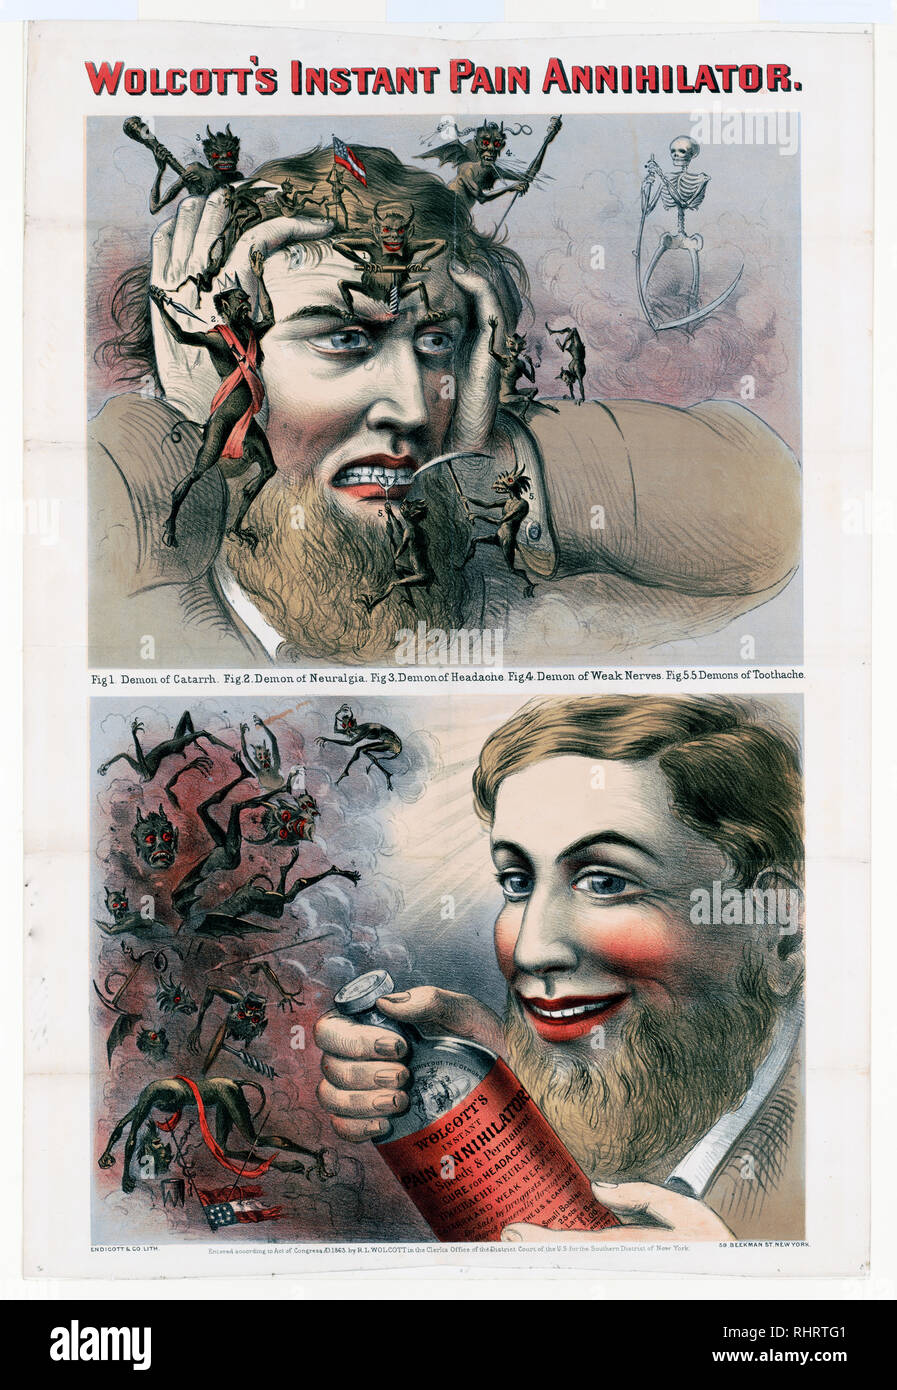 Print shows an advertisement for Wolcott's Instant Pain Annihilator with a man suffering the torment of many demons; he banishes them with Wolcott's formula. Stock Photo